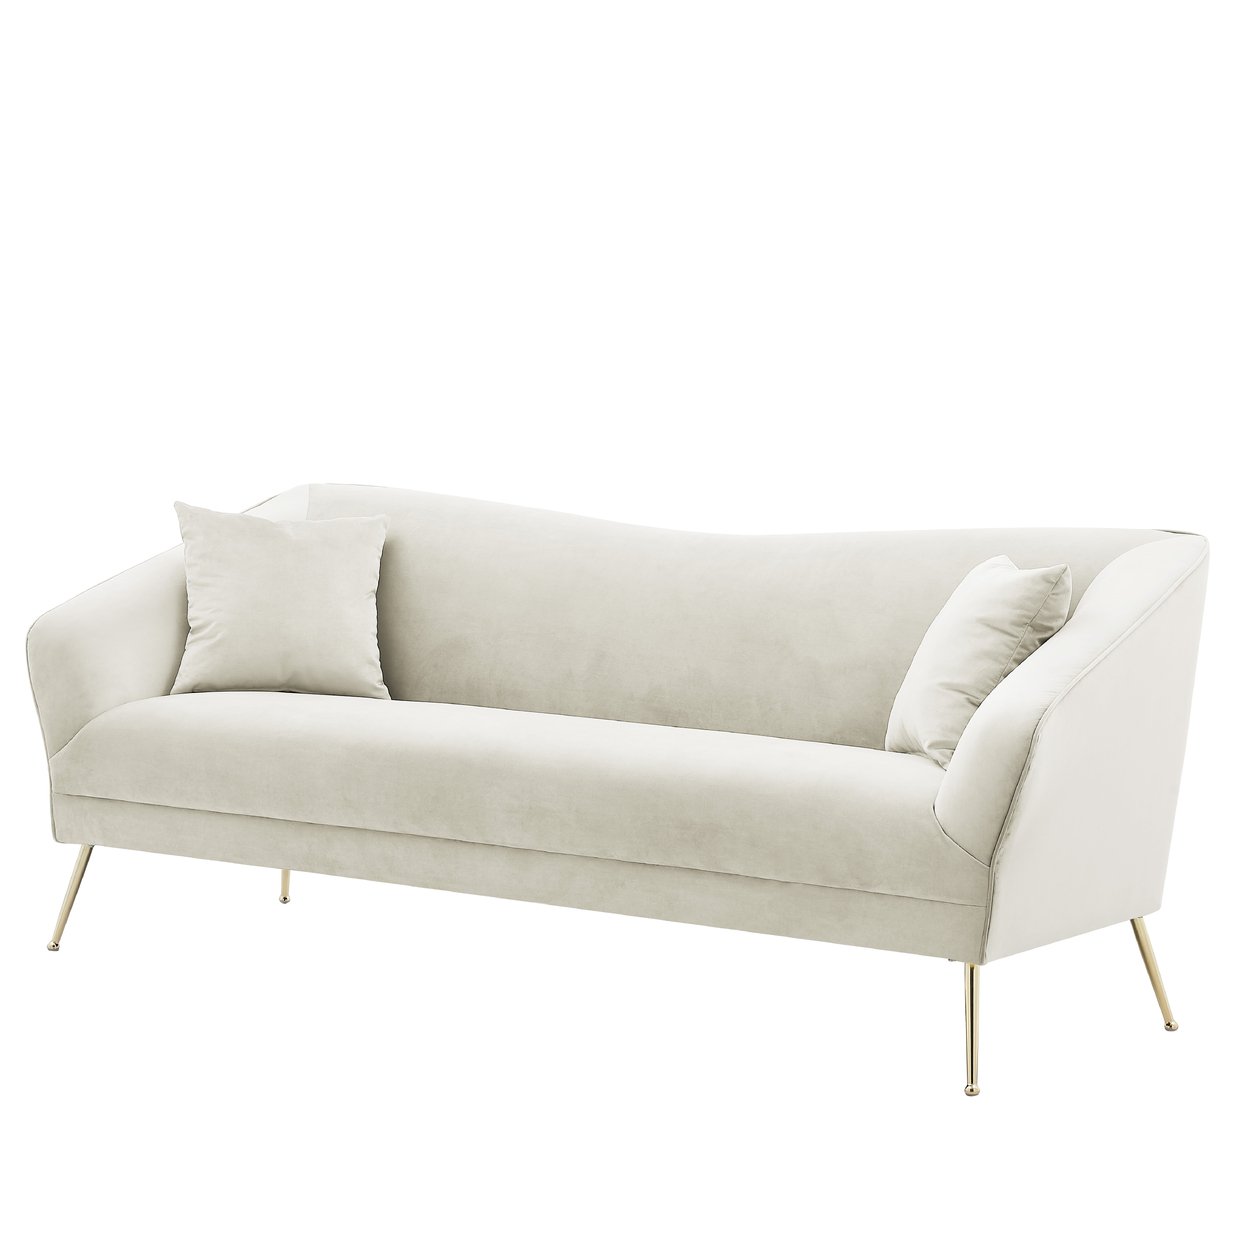 Iconic Home Ember Sofa Velvet Upholstered Tight Seat Back Design Flared Gold Tone Metal Legs With 2 Decorative Pillows - Beige